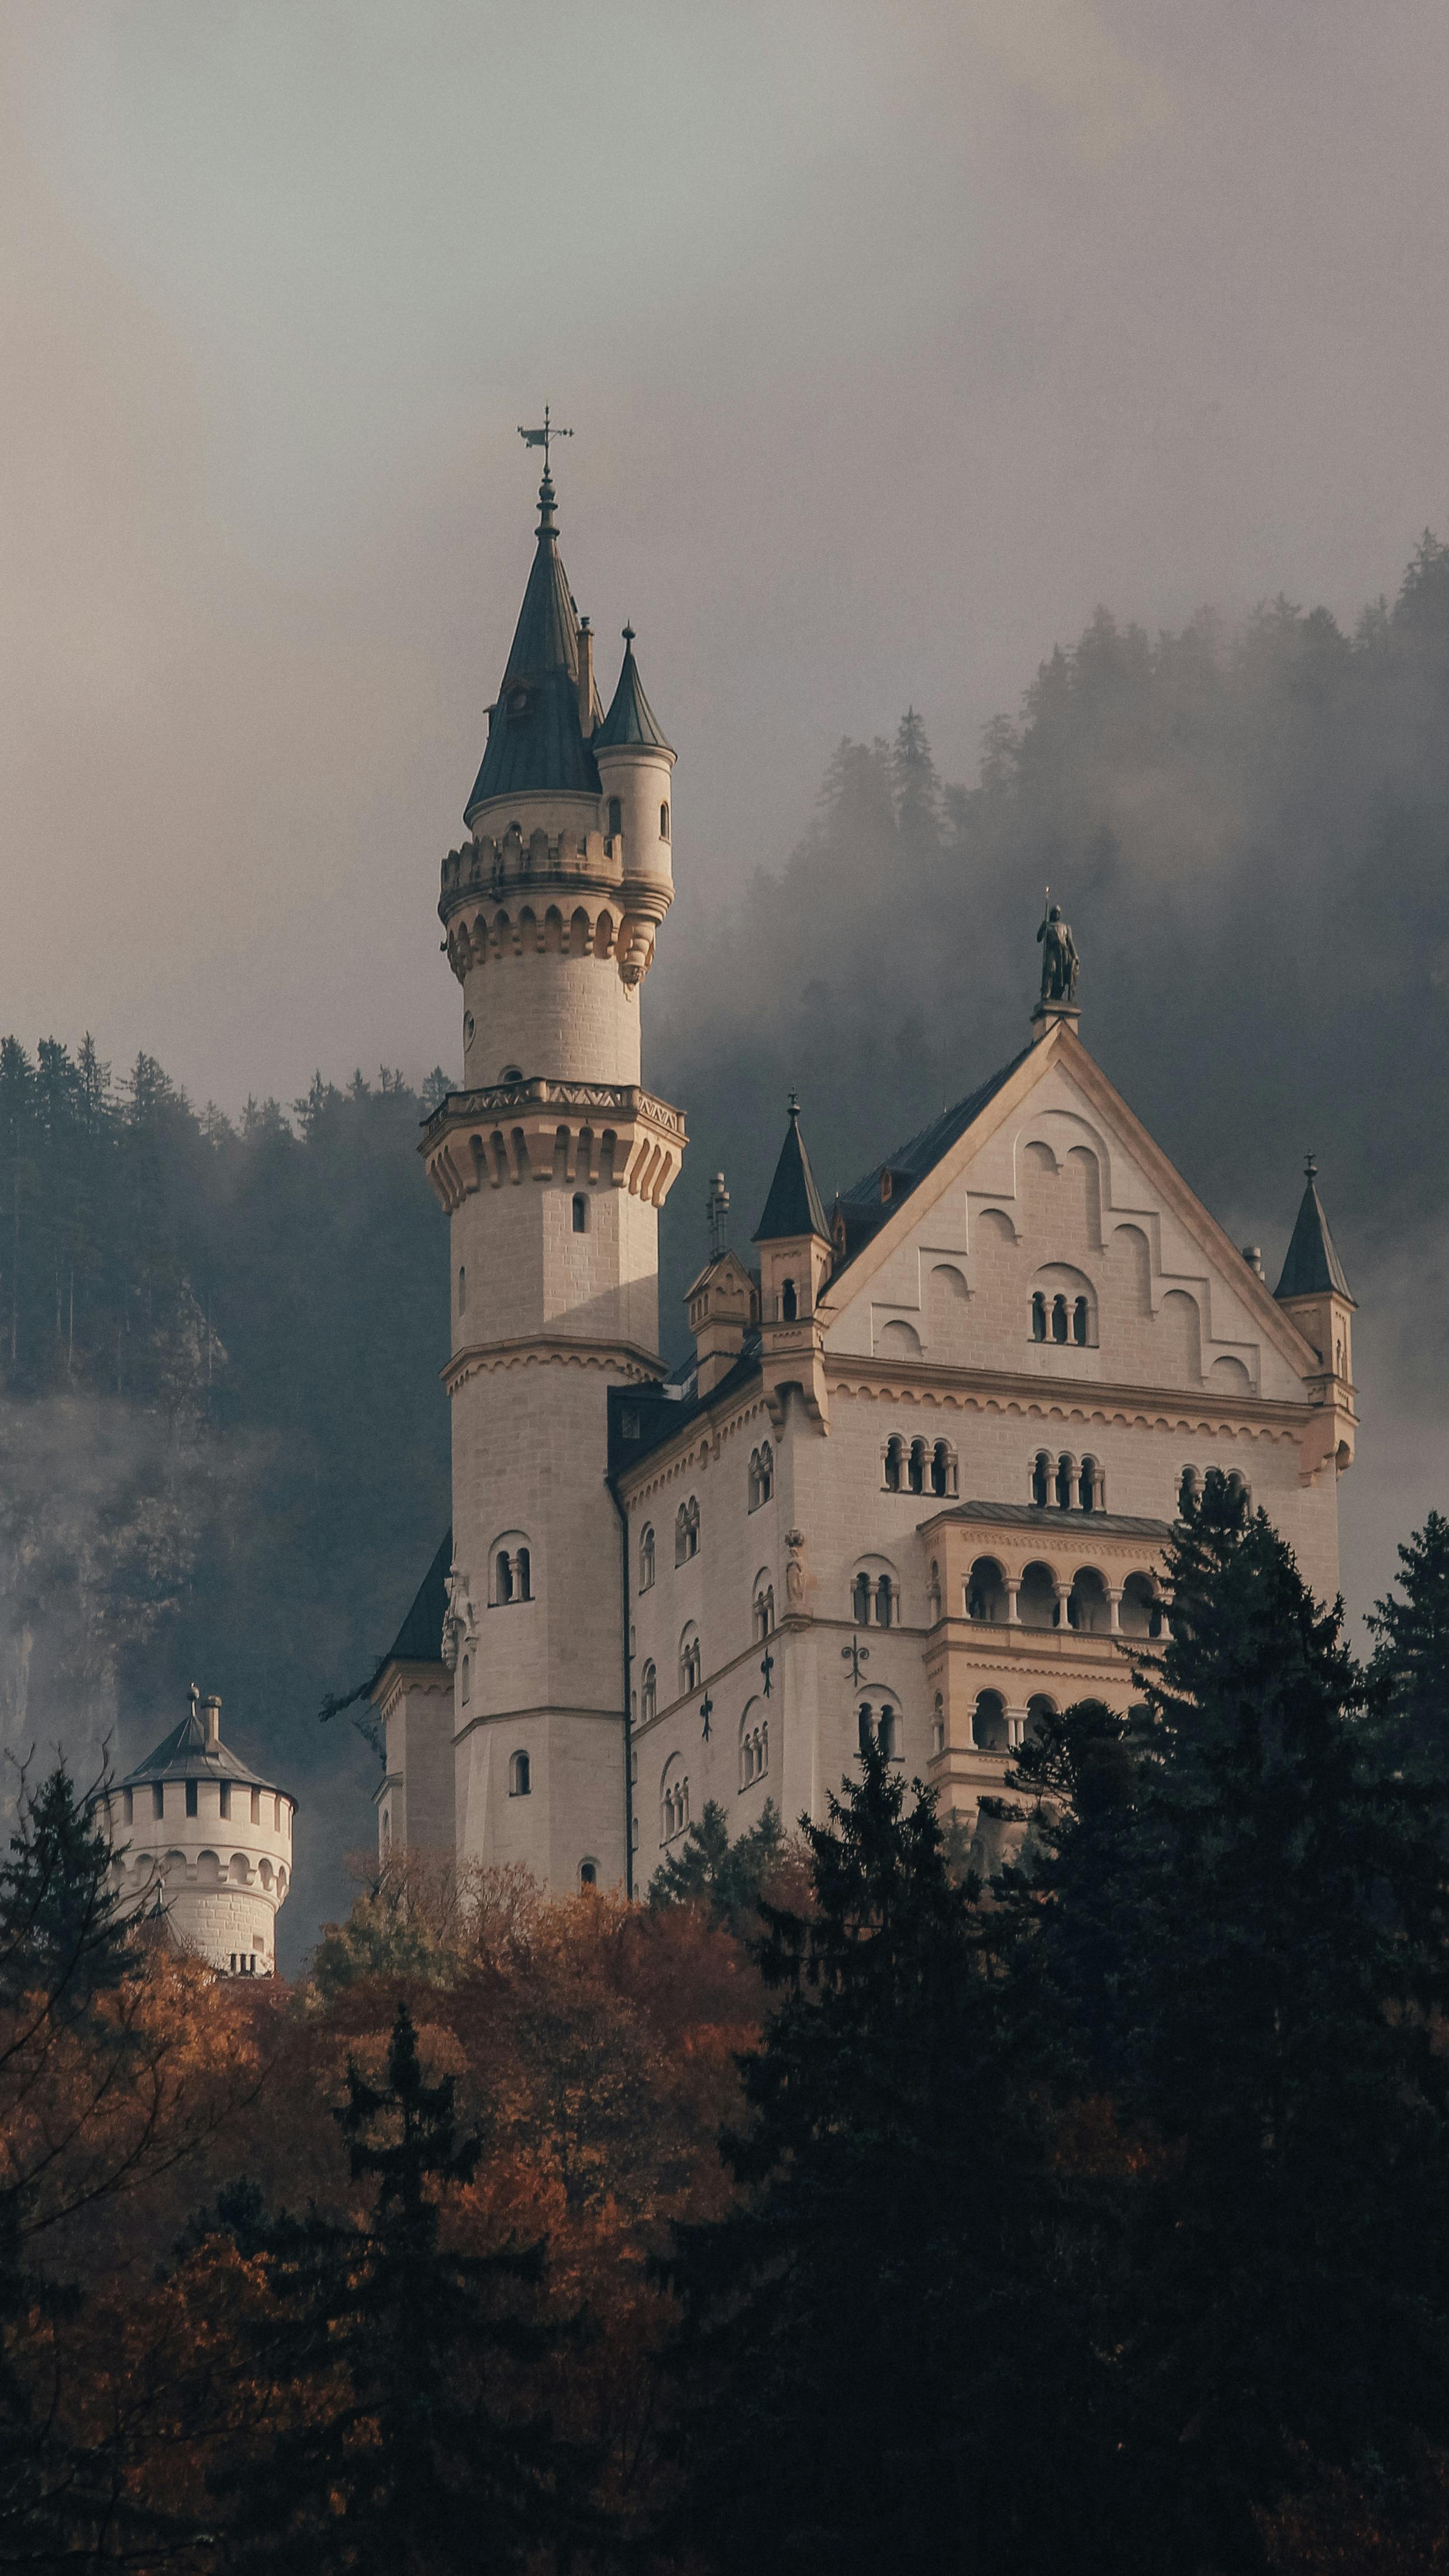 Old medieval castle with towers in forest · Free Stock Photo